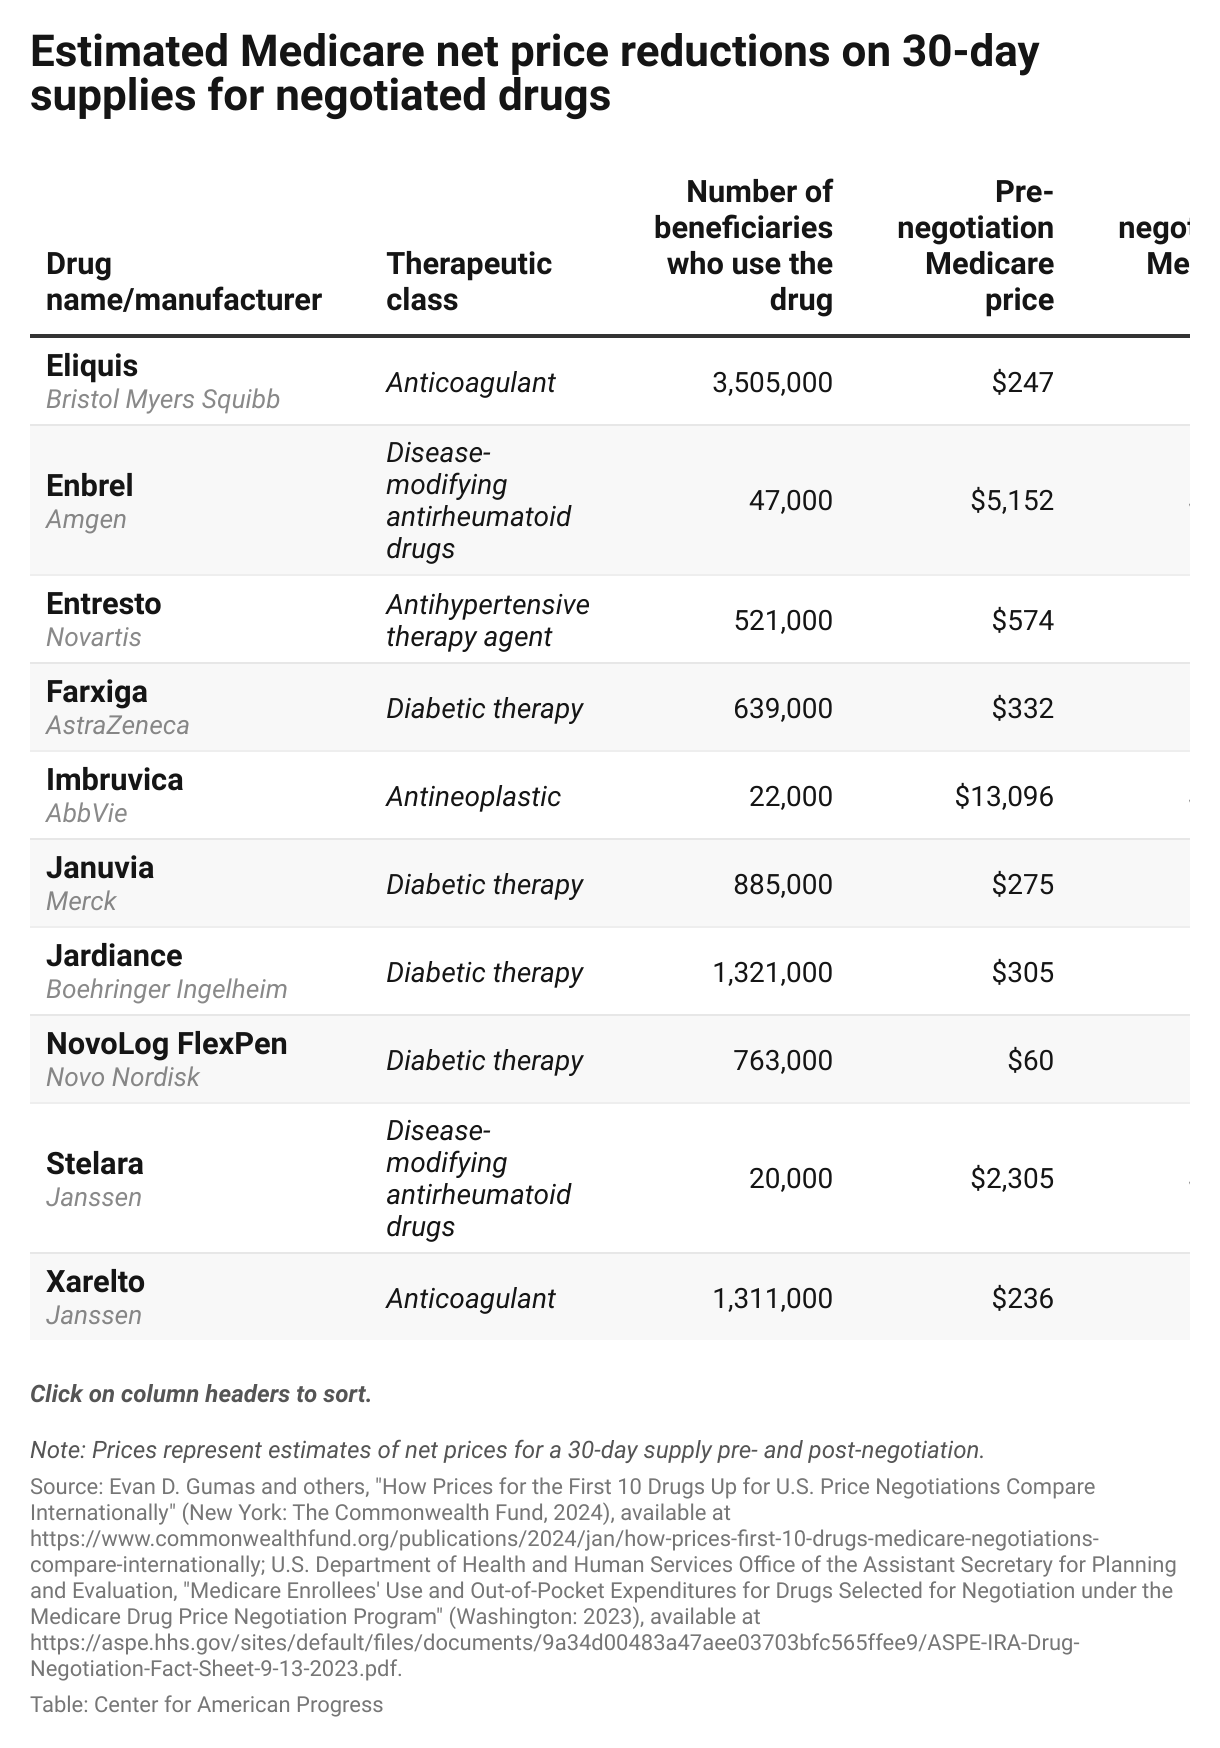 A table that estimates net Medicare prices for the 10 drugs undergoing Medicare price negotiation before and after negotiation. Reductions in net prices for a 30-day supply of each drug range from $30 for NovoLog FlexPen to $6,548 for Imbruvica.